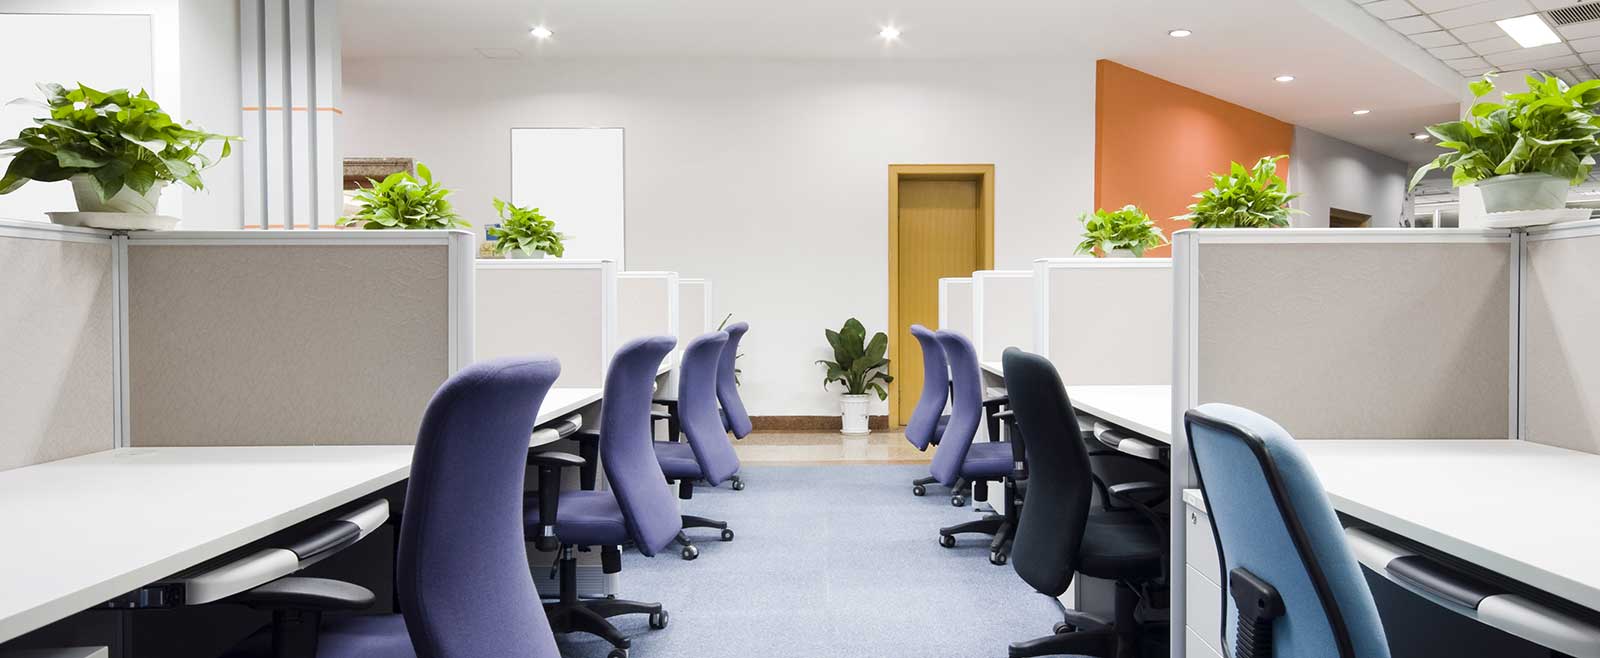 Advanced-Group-Commercial-Cleaning-Services-Office-Cleaning-commercial-cleaning-services